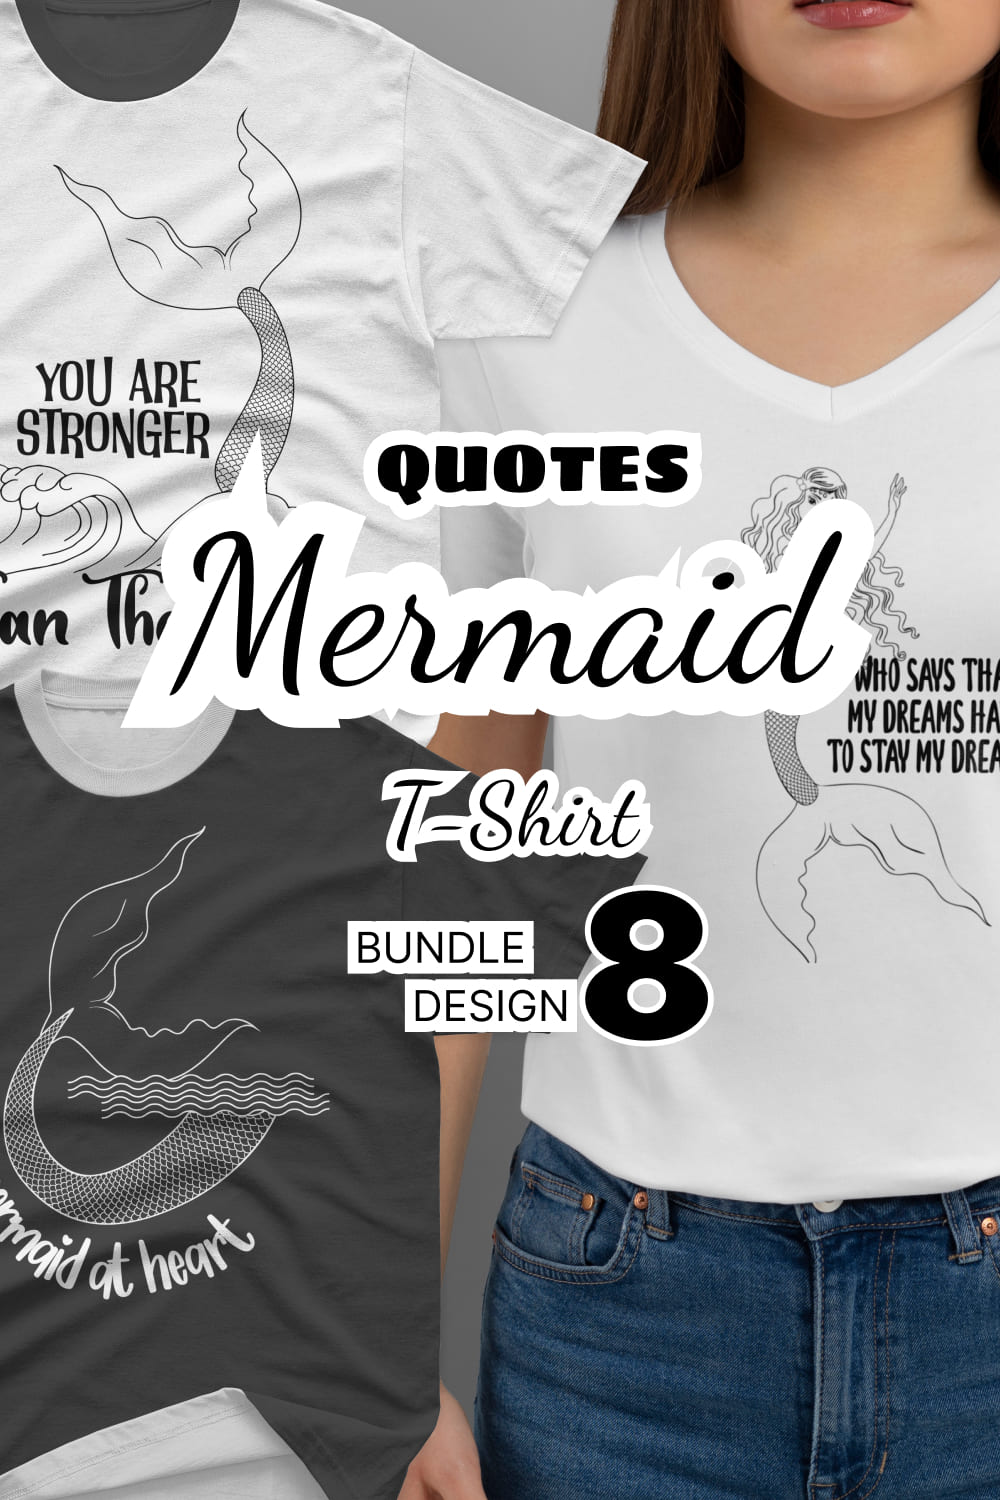 Mermaid quotes images of pinterest.